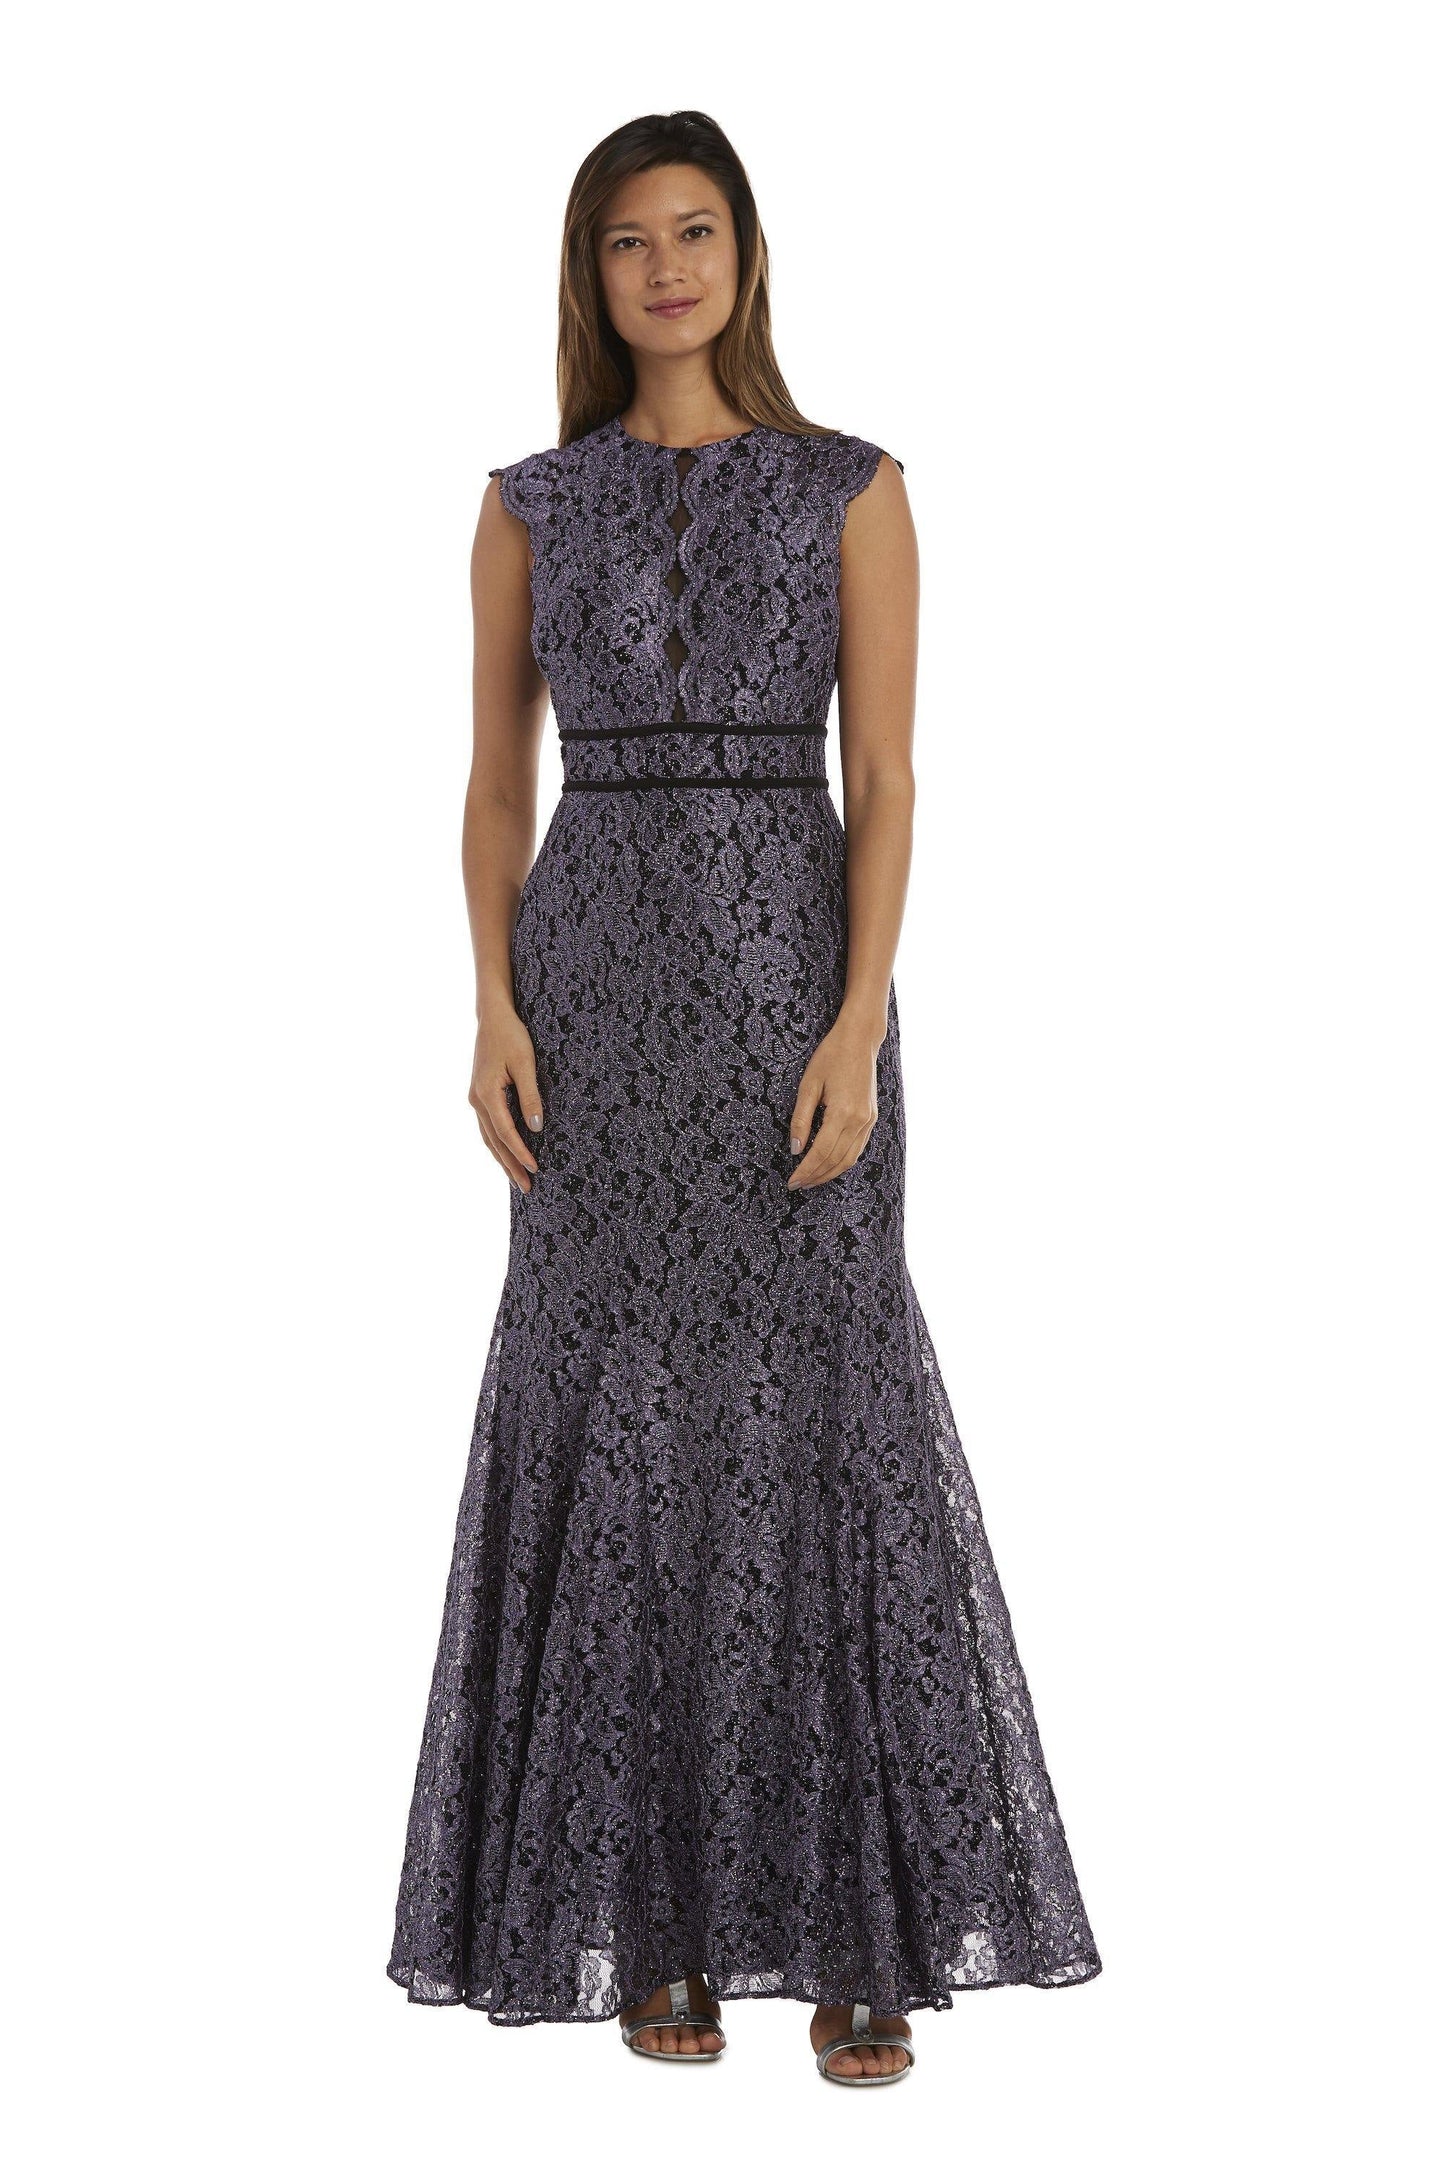 Nightway Long Sleeveless Petite Lace Dress 21842P - The Dress Outlet